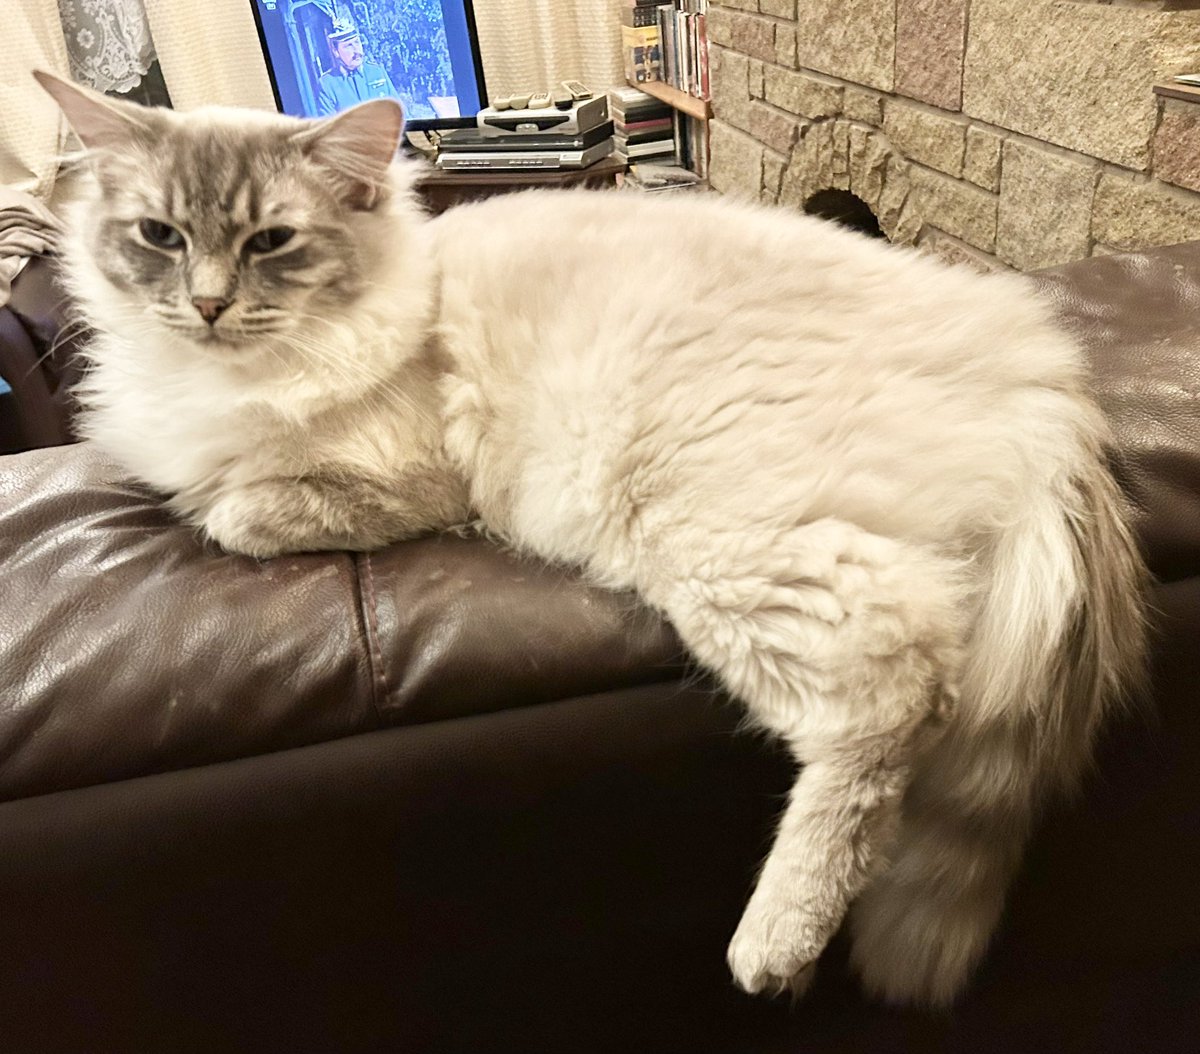 @ElizabethRadcl5 Meowy Moggytastic Caturday Saturday Boots 😸🐾and Beth😺from pawsomely fluffy adorable lovely lazy Leo Cat😻🐾relaxing and posing on the back of Paul’s armchair in the living room😹🐾Cloudy hazy windy in Shropshire😽🐾#RagDollCat #CatsOfTwitter